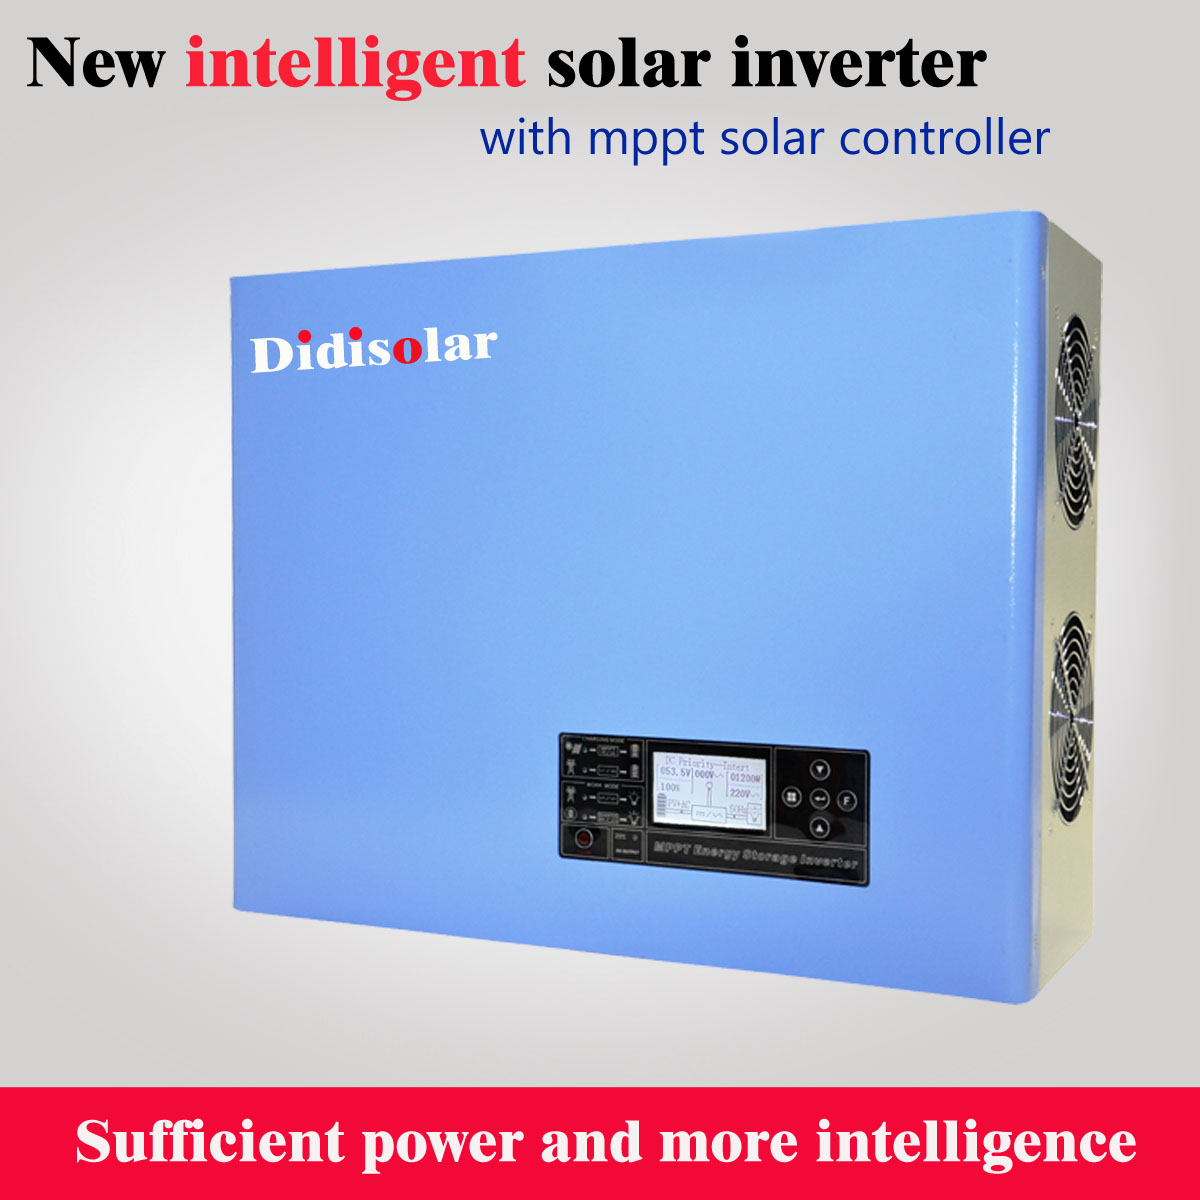 How to set the time and date of solar inverter?